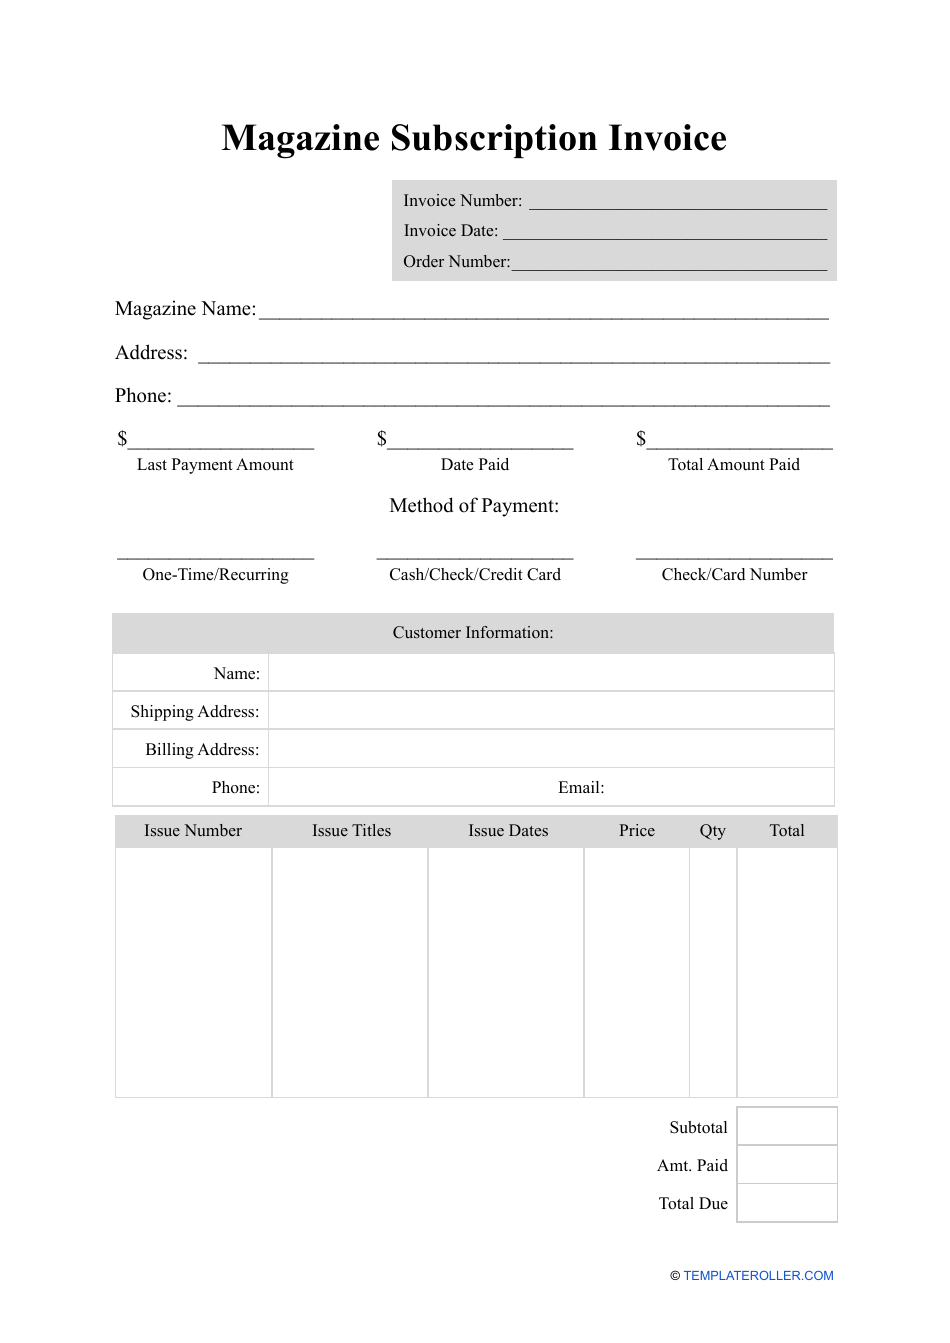 Magazine Subscription Invoice Template, Page 1